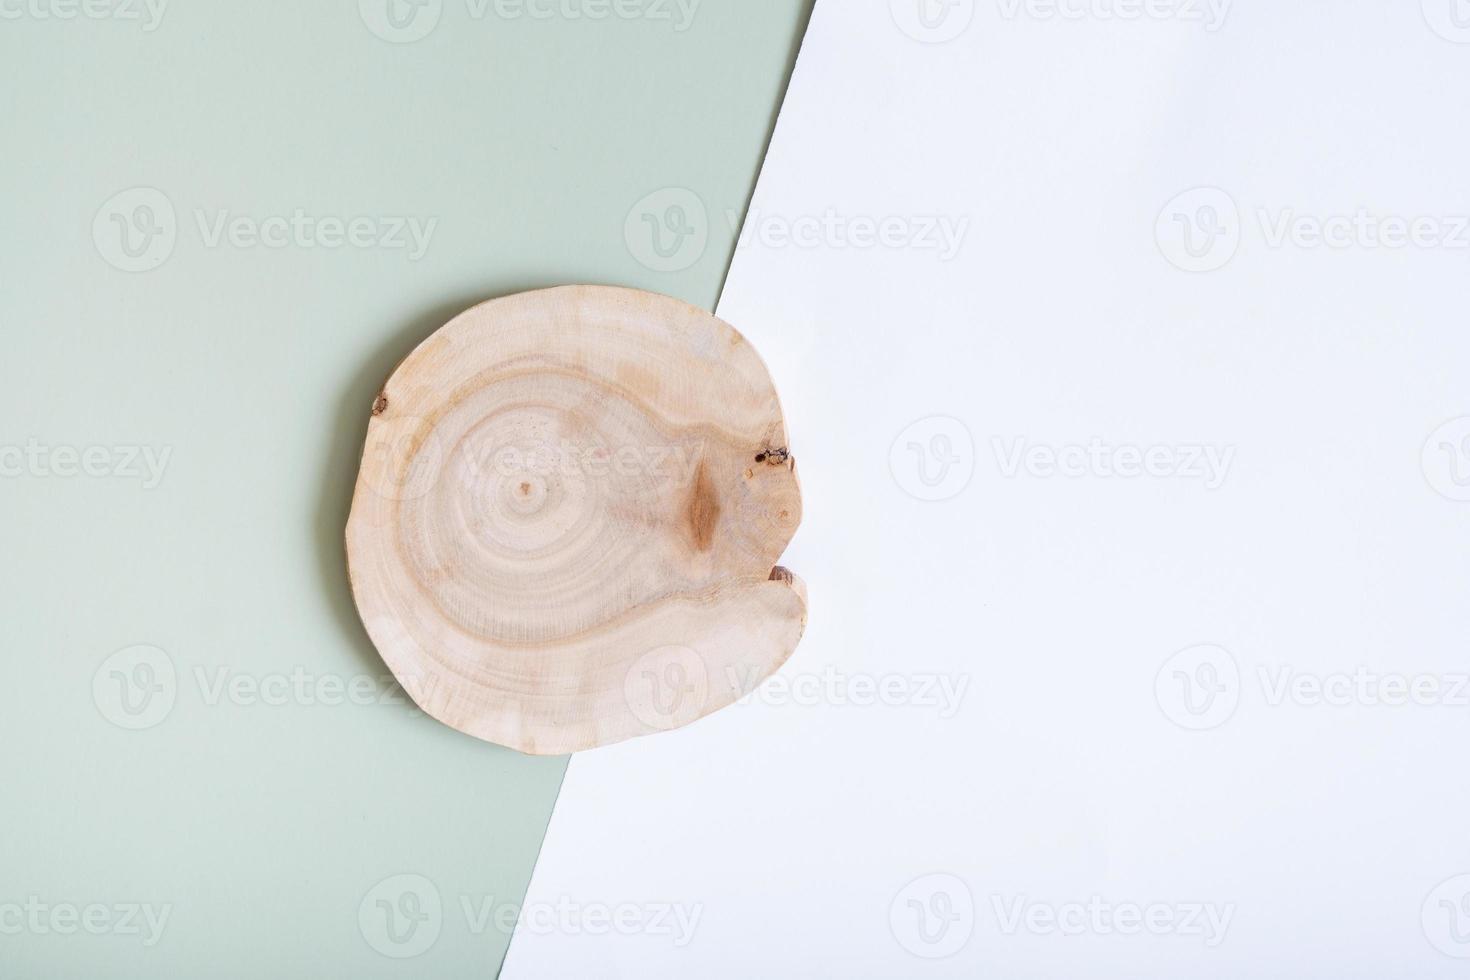 Wooden slice as podium or pedrstal top view, flat lay on colored background with nature decoration. Natural podium or pedestal mock up photo